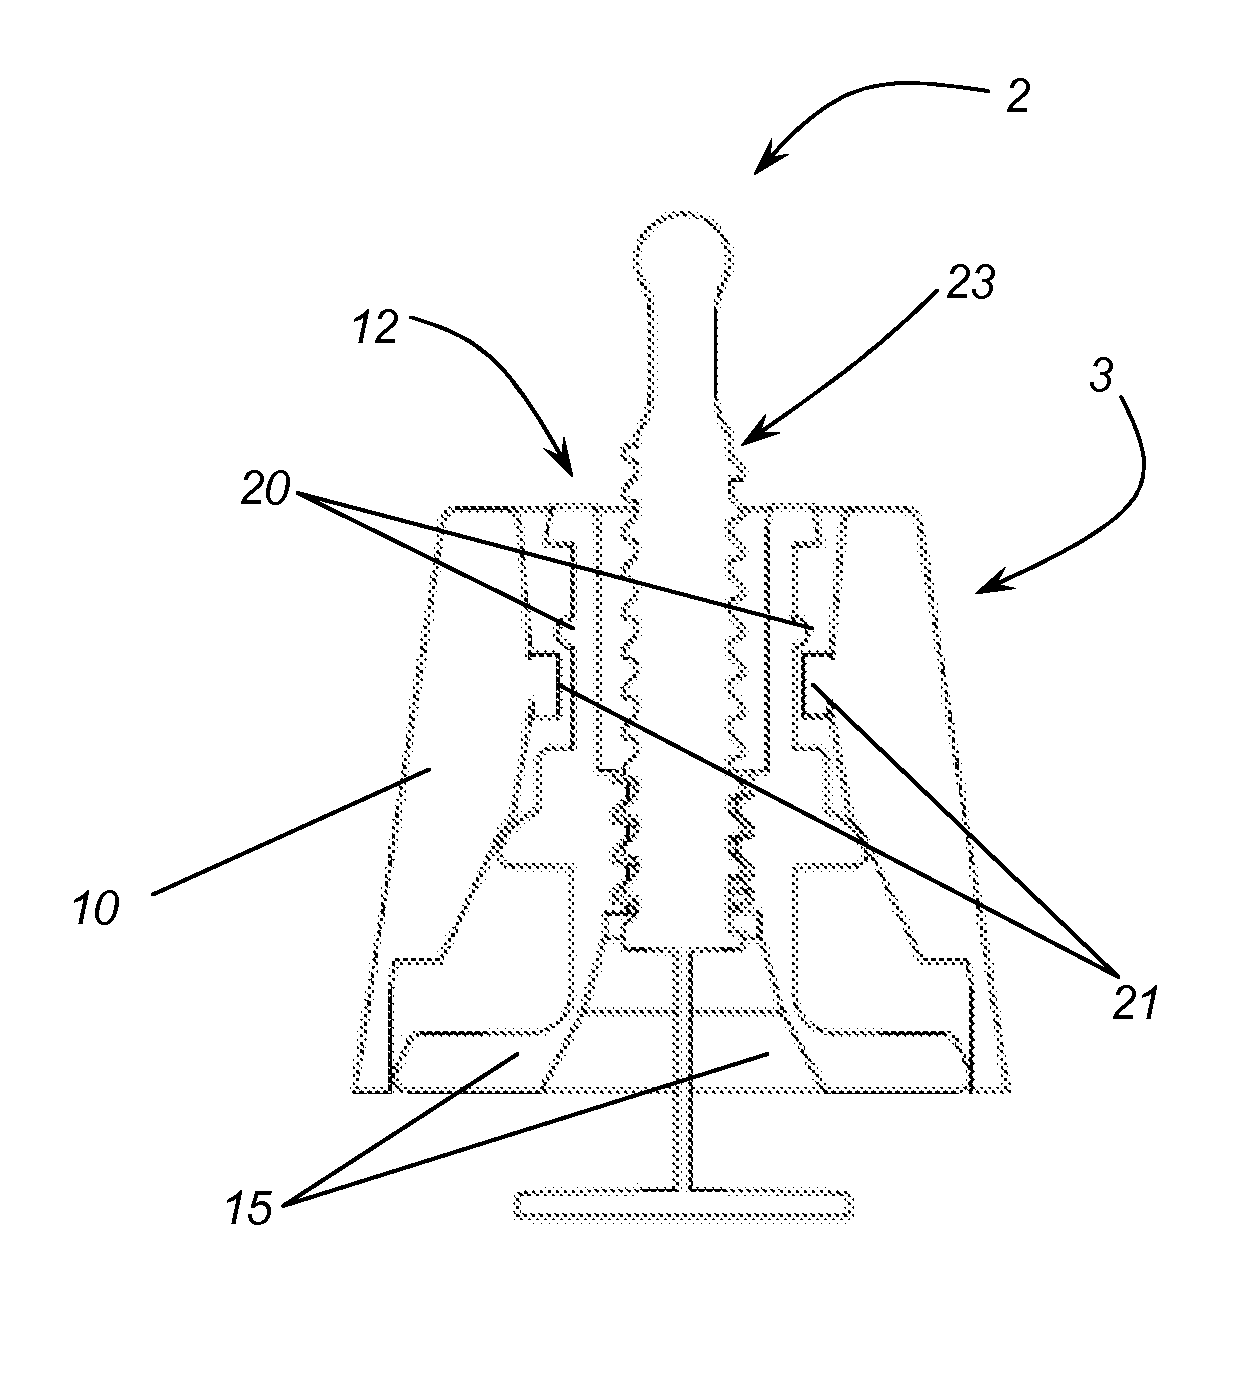 Leveling device for laying tiles or the like